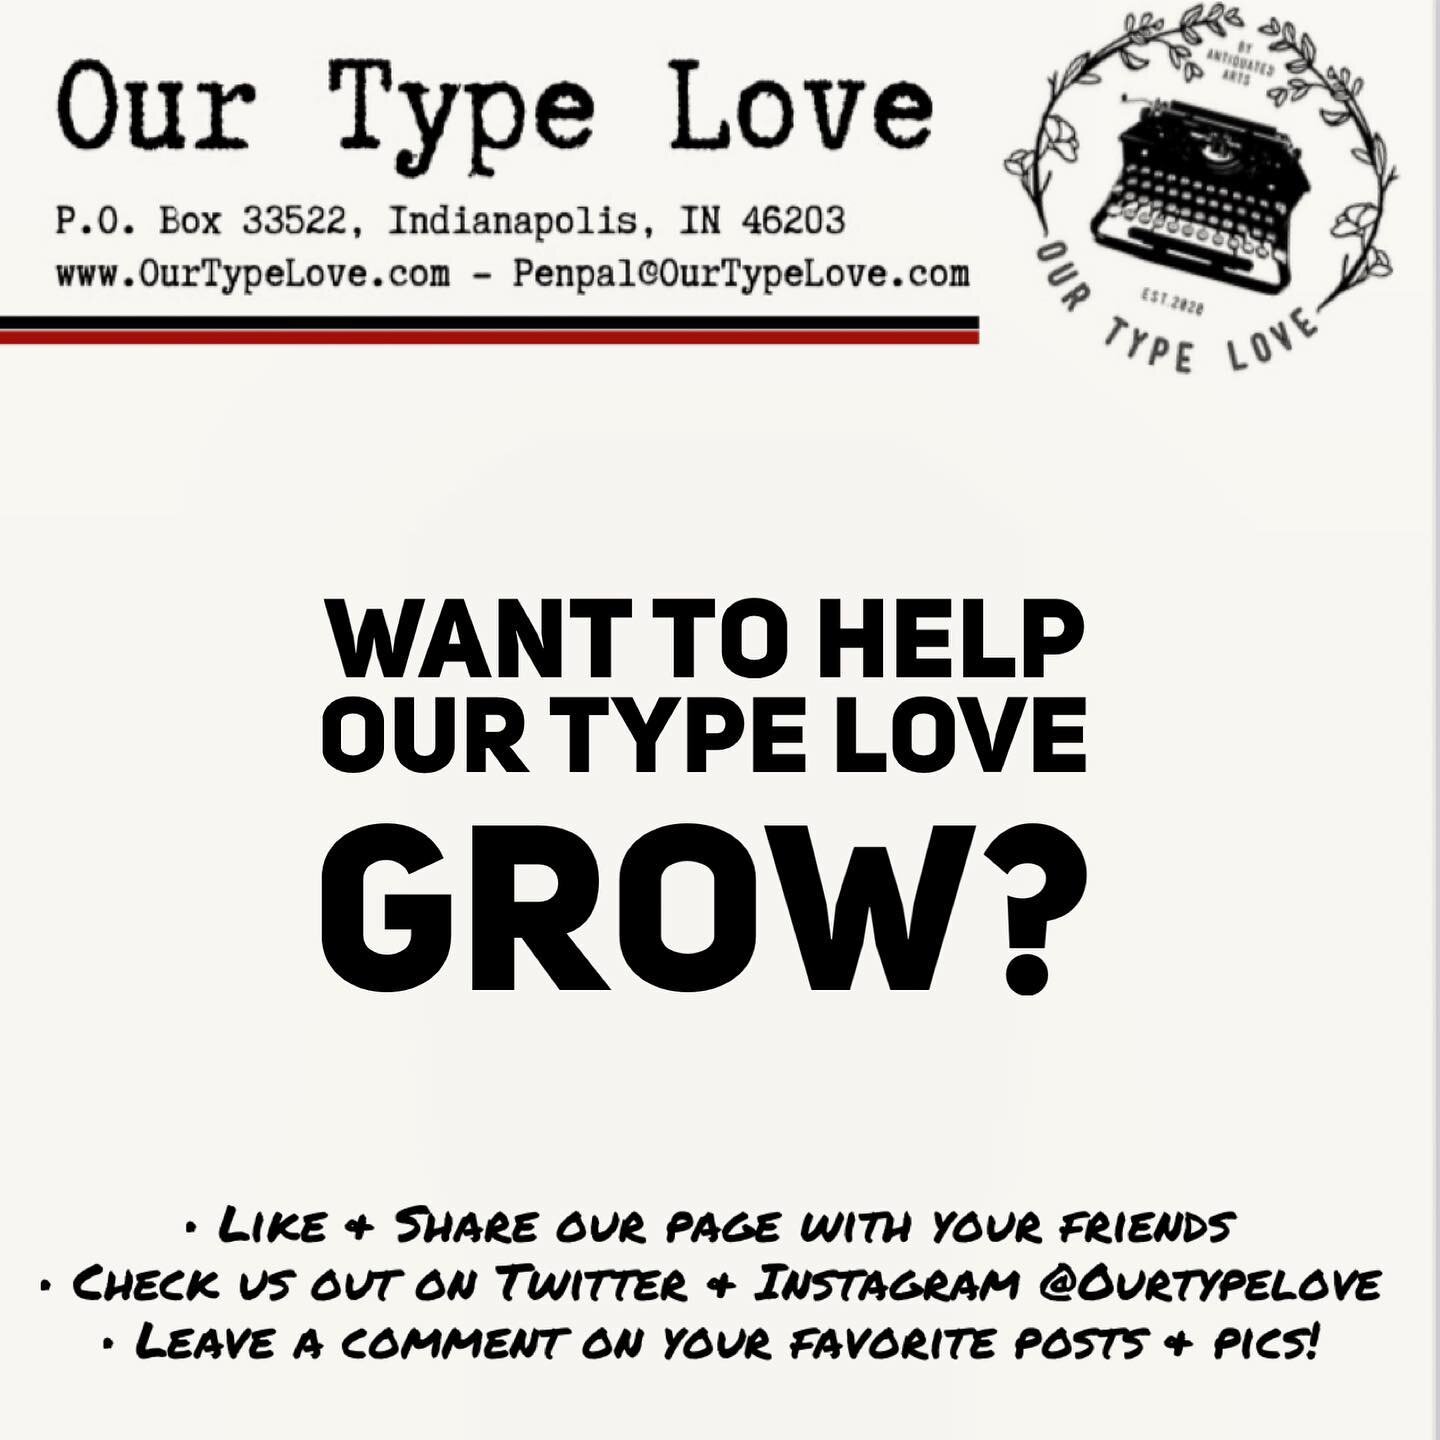 Want to help Our Type Love grow? 
&bull;Like &amp; Share our page to your friends
&bull;Check us out on Facebook, Twitter, and INSTAGRAM @Ourtypelove
&bull;leave a comment on your favorite pics!

We&rsquo;ve only just begun. :)